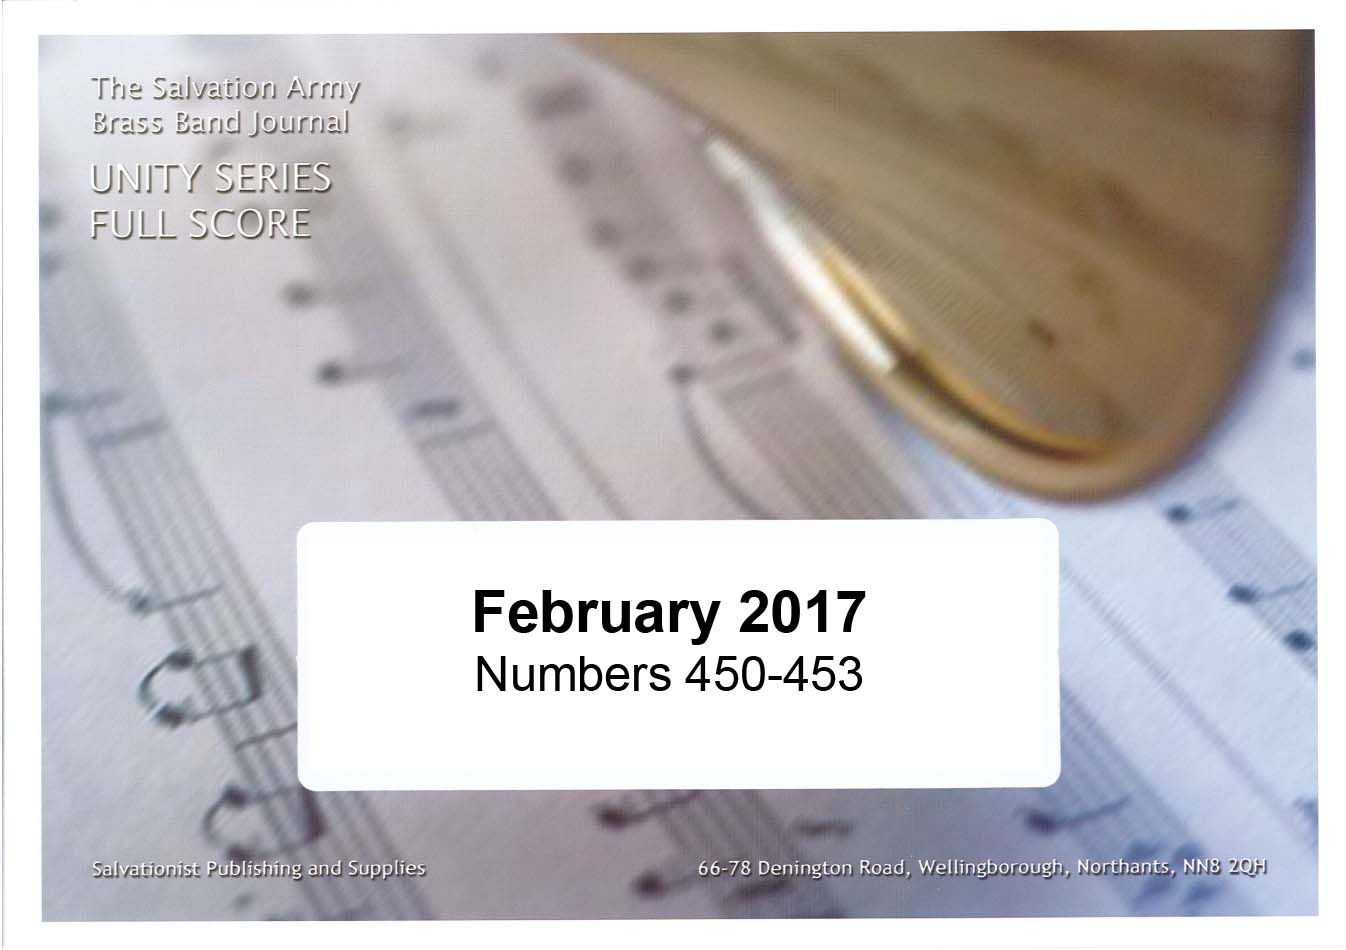 Unity Series Band Journal February 2017 Numbers 450 - 453